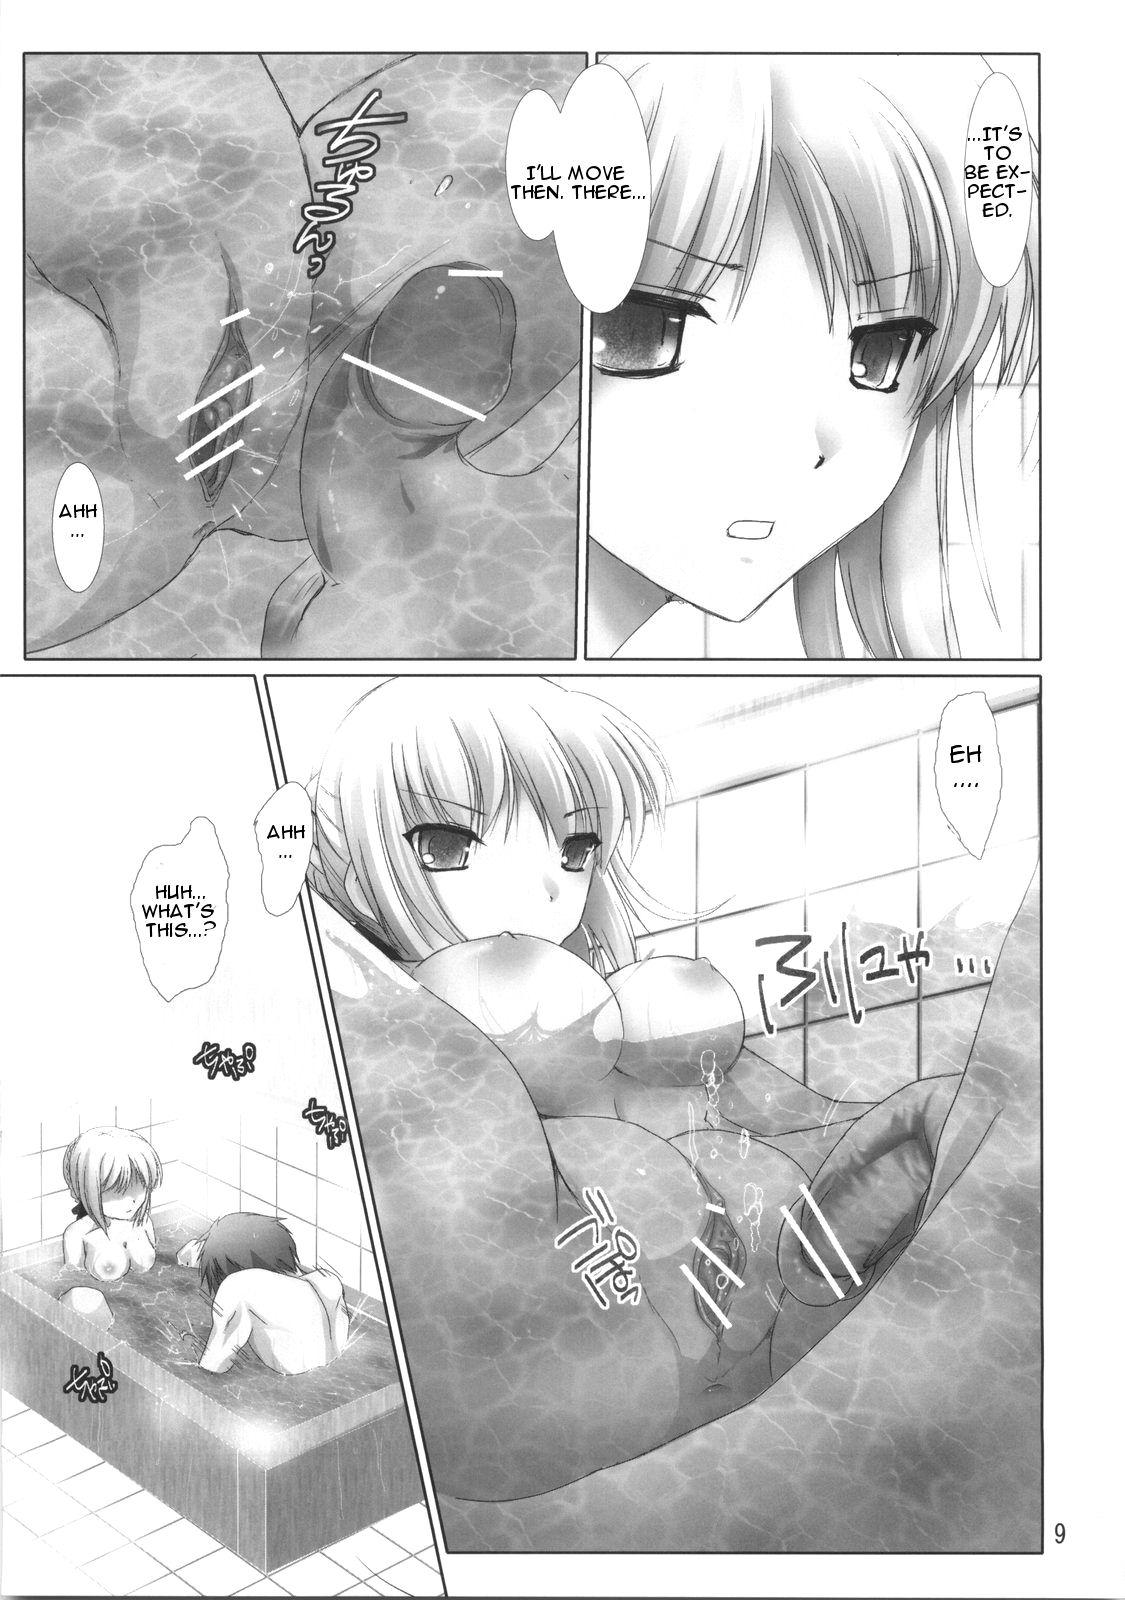 Public BLACK 99% - Fate stay night Fate hollow ataraxia Dick Sucking Porn - Page 8